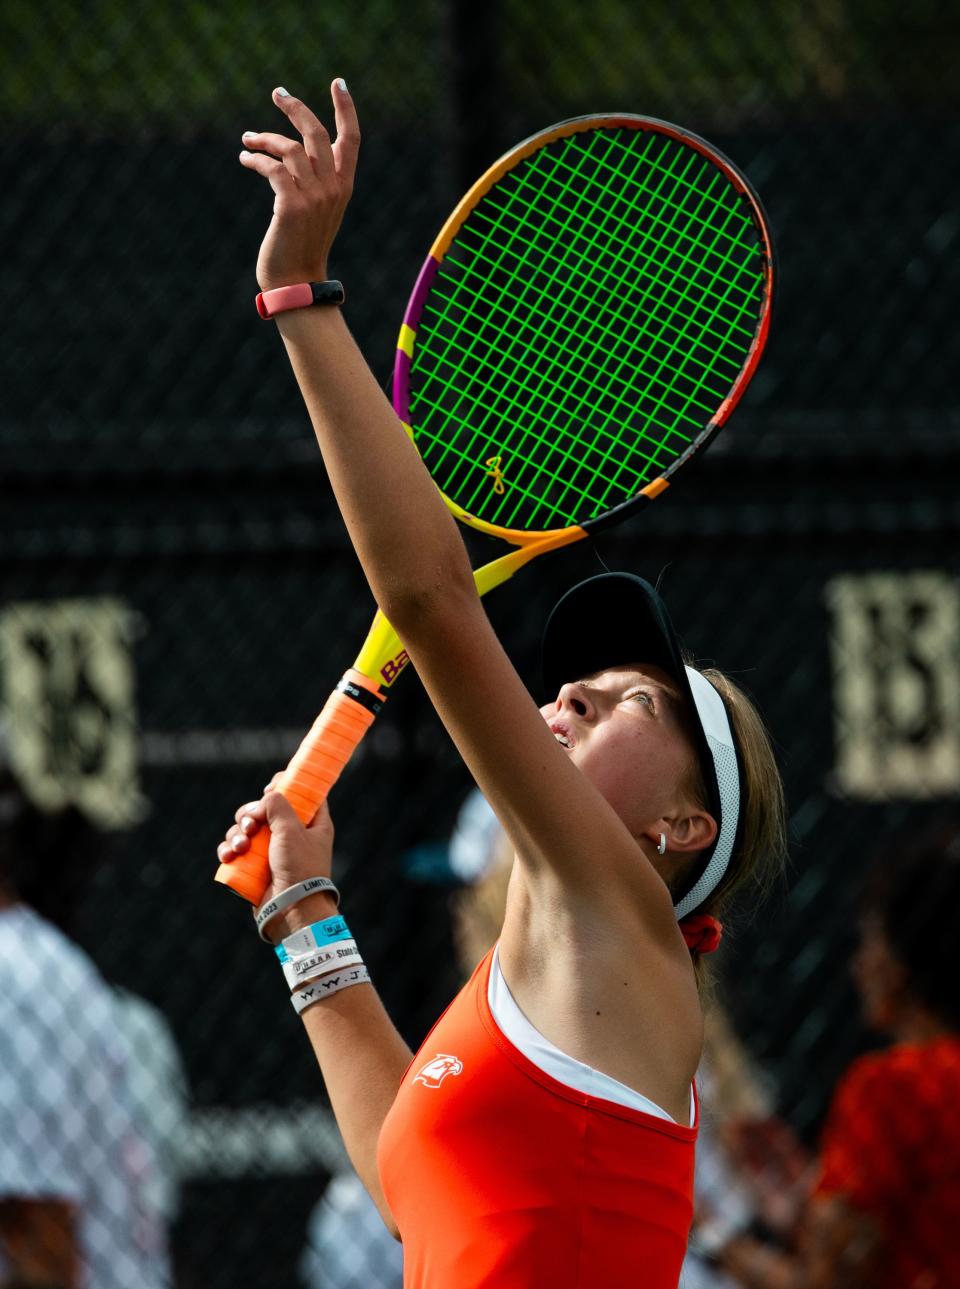 Skyridge’s Bella Lewis competes in the first singles finals against Layton’s Tia Christopulos during the 2023 6A Girls Tennis Championships at Liberty Park Tennis Courts in Salt Lake City on Saturday, Sept. 30, 2023. Lewis won the match. | Megan Nielsen, Deseret News